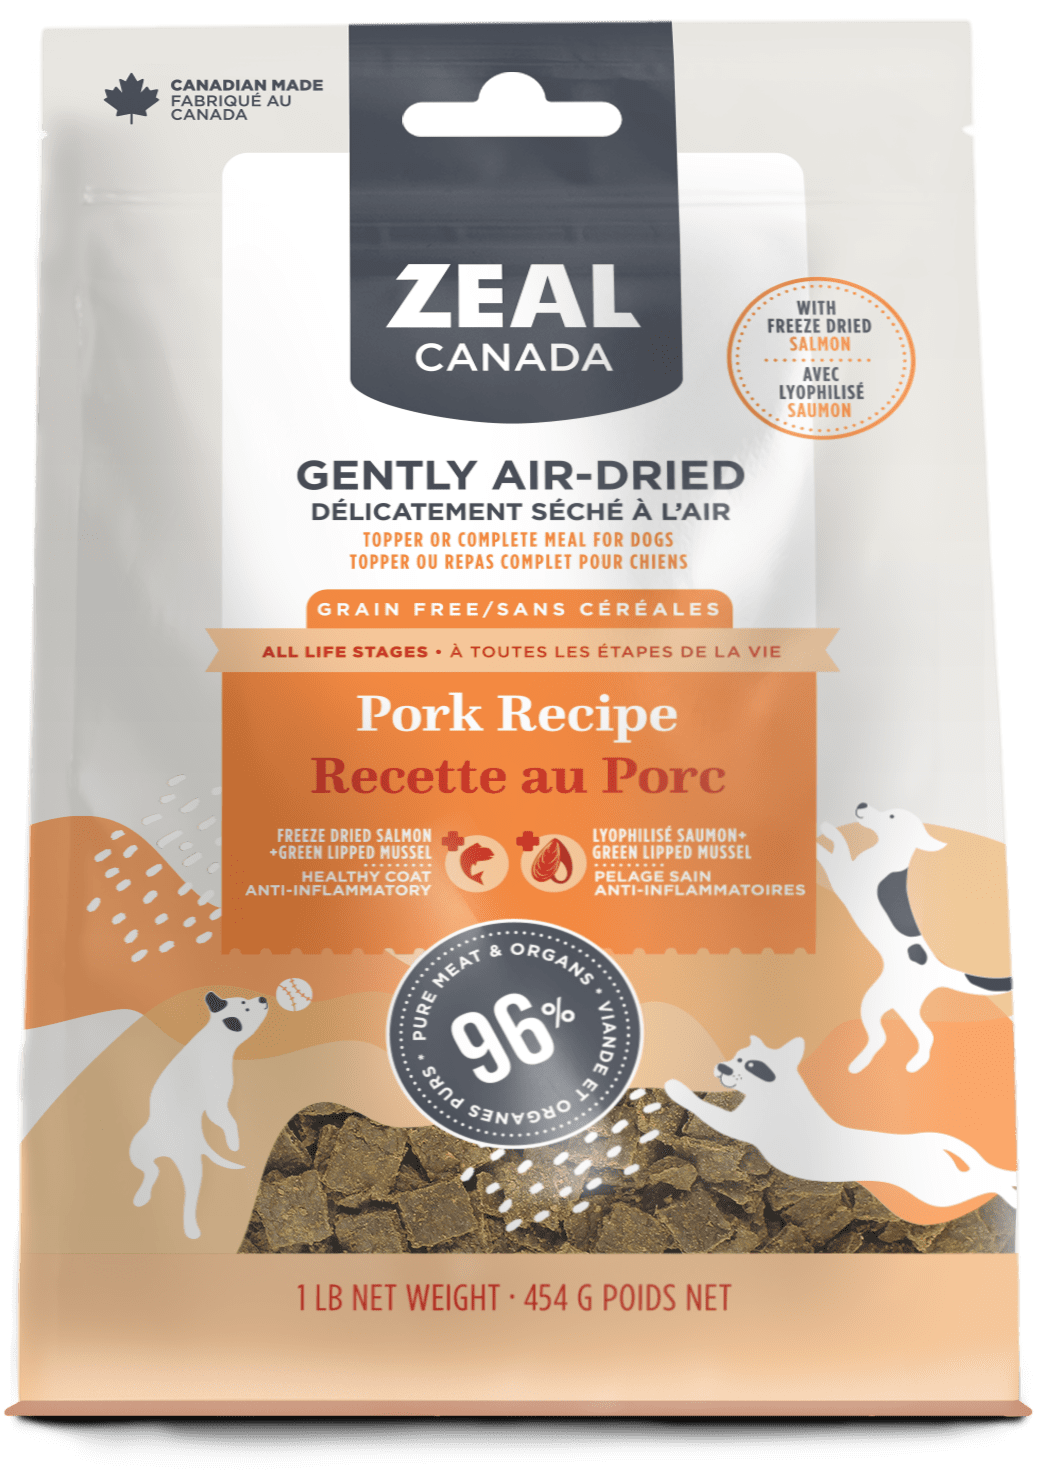 Air-Dried Pork with Freeze-Dried Salmon - Air Dried Dog Food - Zeal - PetToba-Zeal